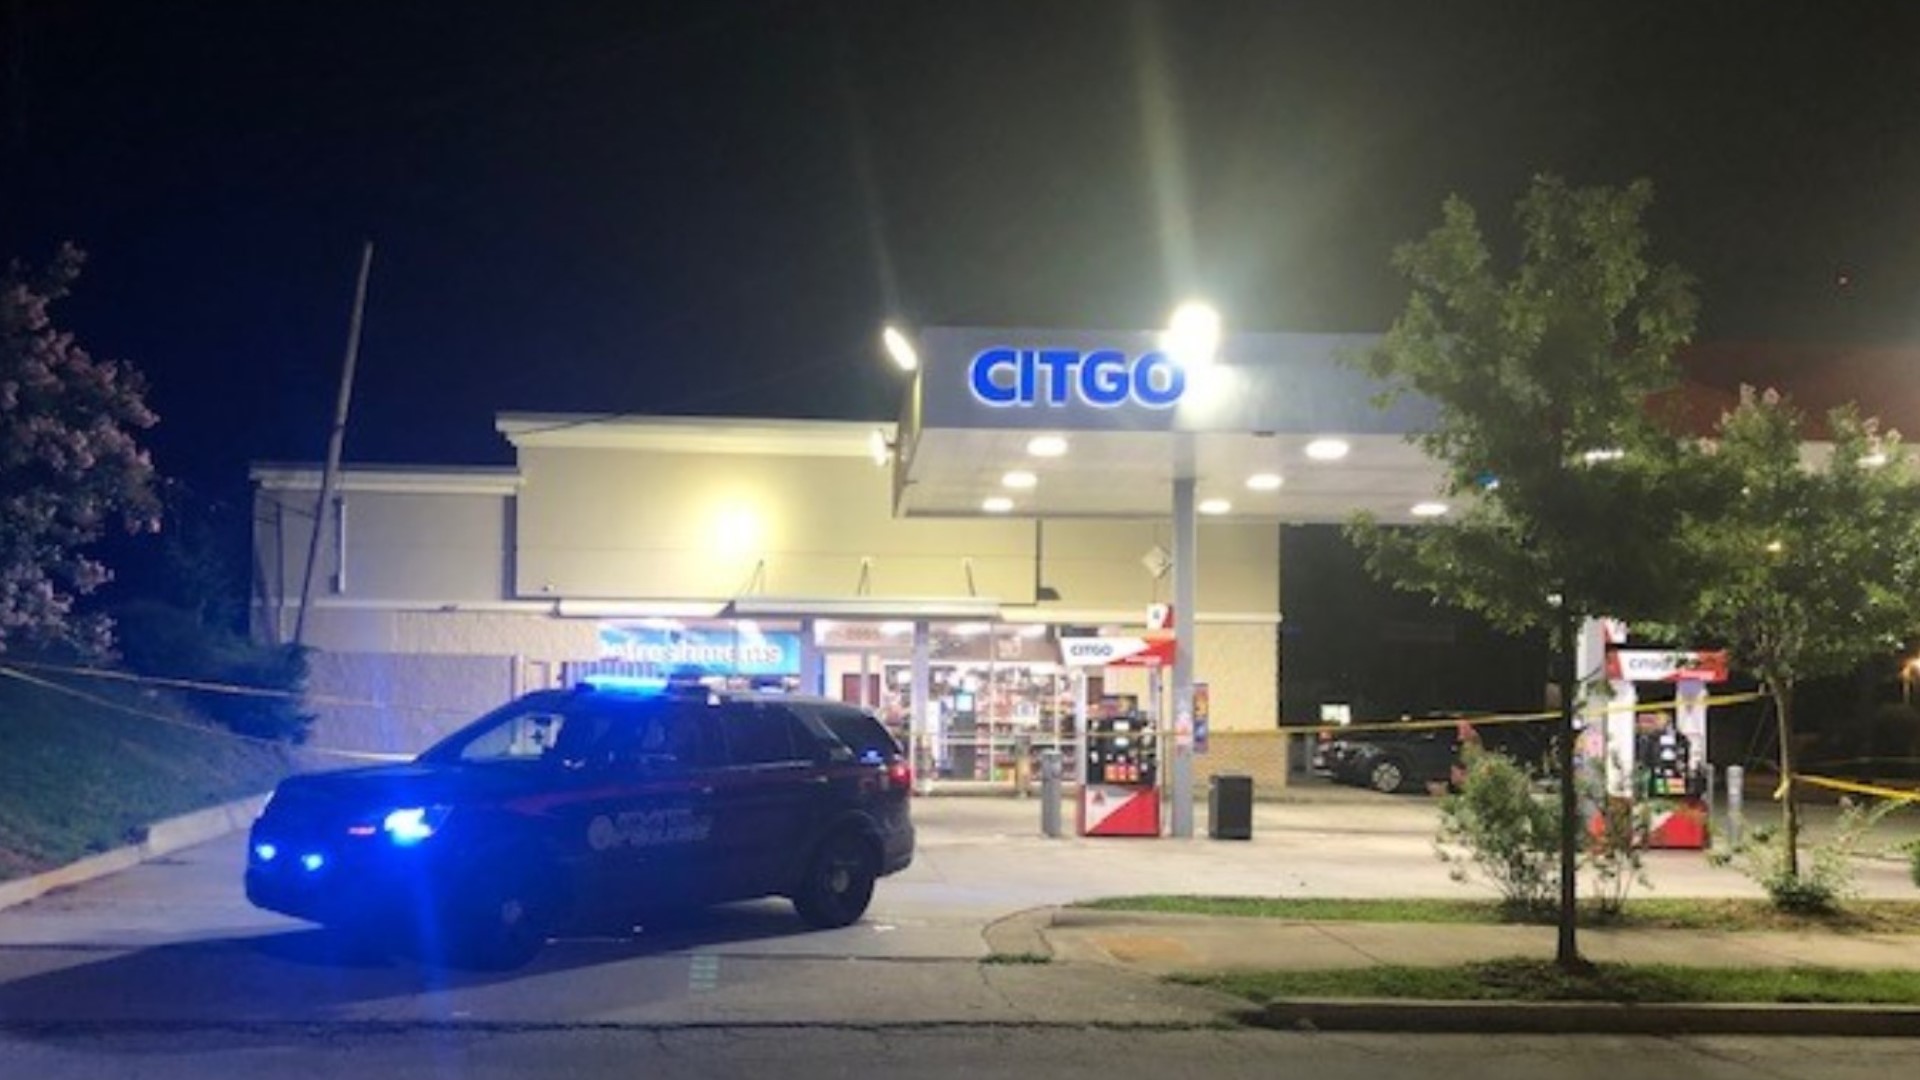 The victim was playing a game machine inside the Citgo gas station when the suspect attempted to rob him at gun point, Atlanta Police say.